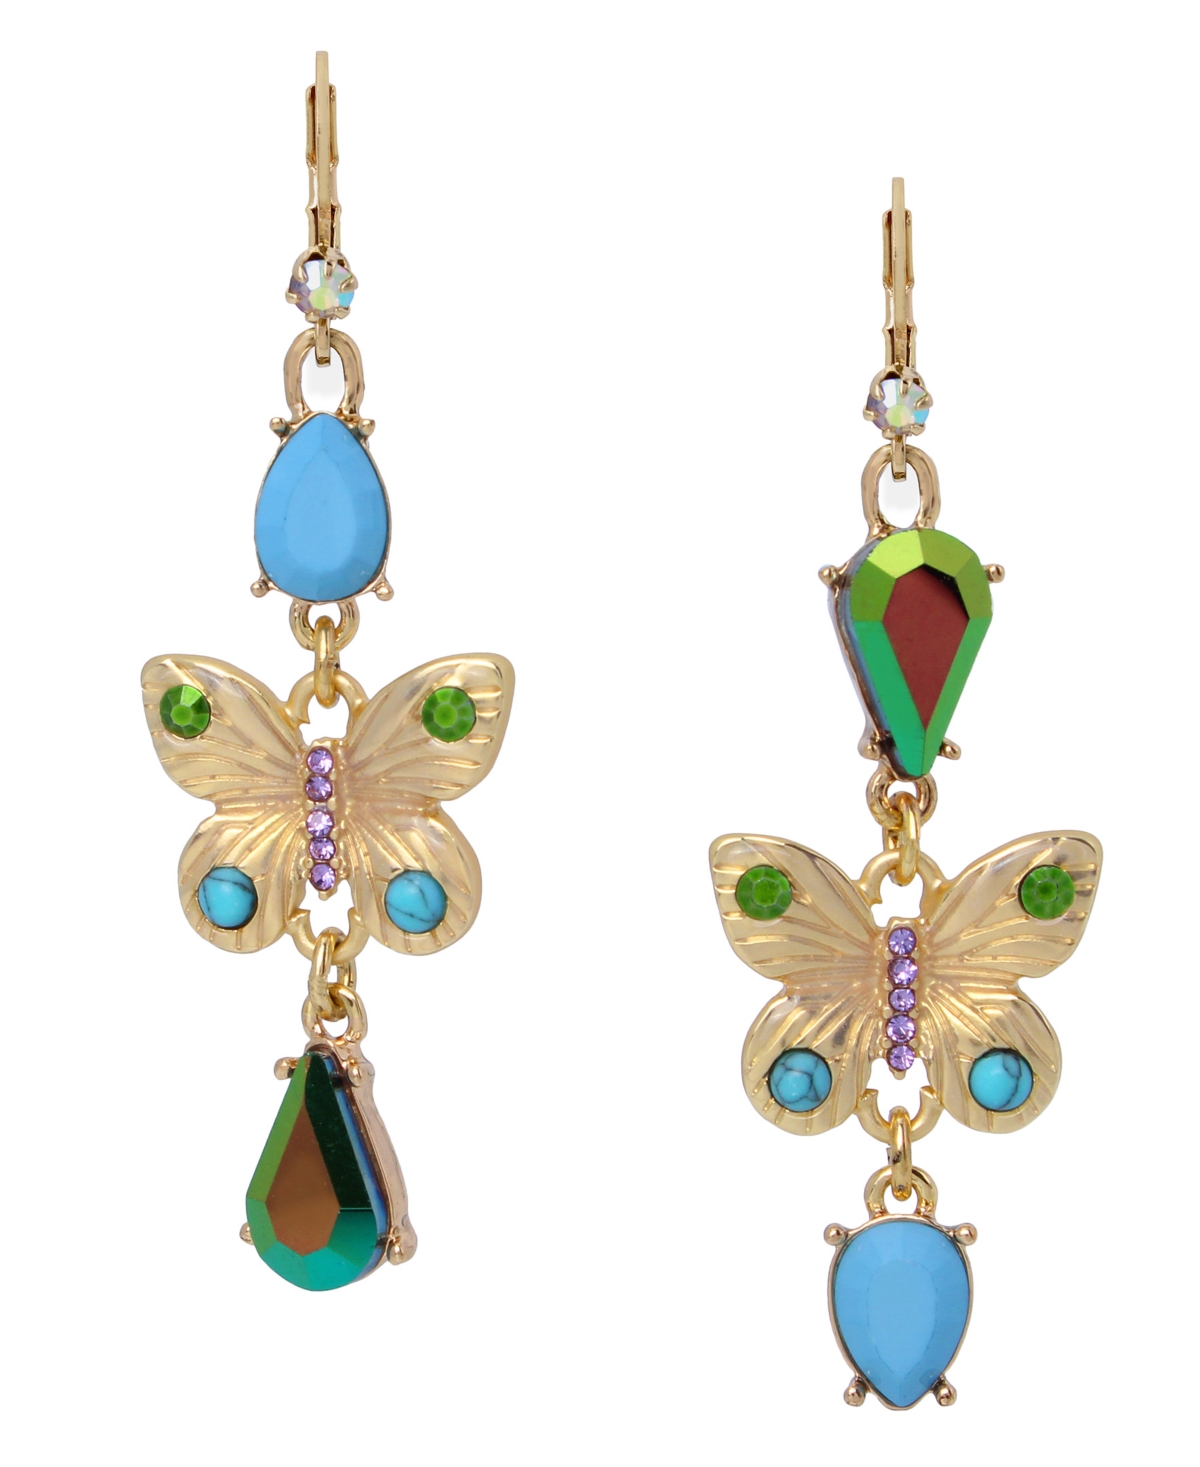 Betsey Johnson Genuine Semi - Precious Turquoise Stone Butterfly Mismatched Earrings